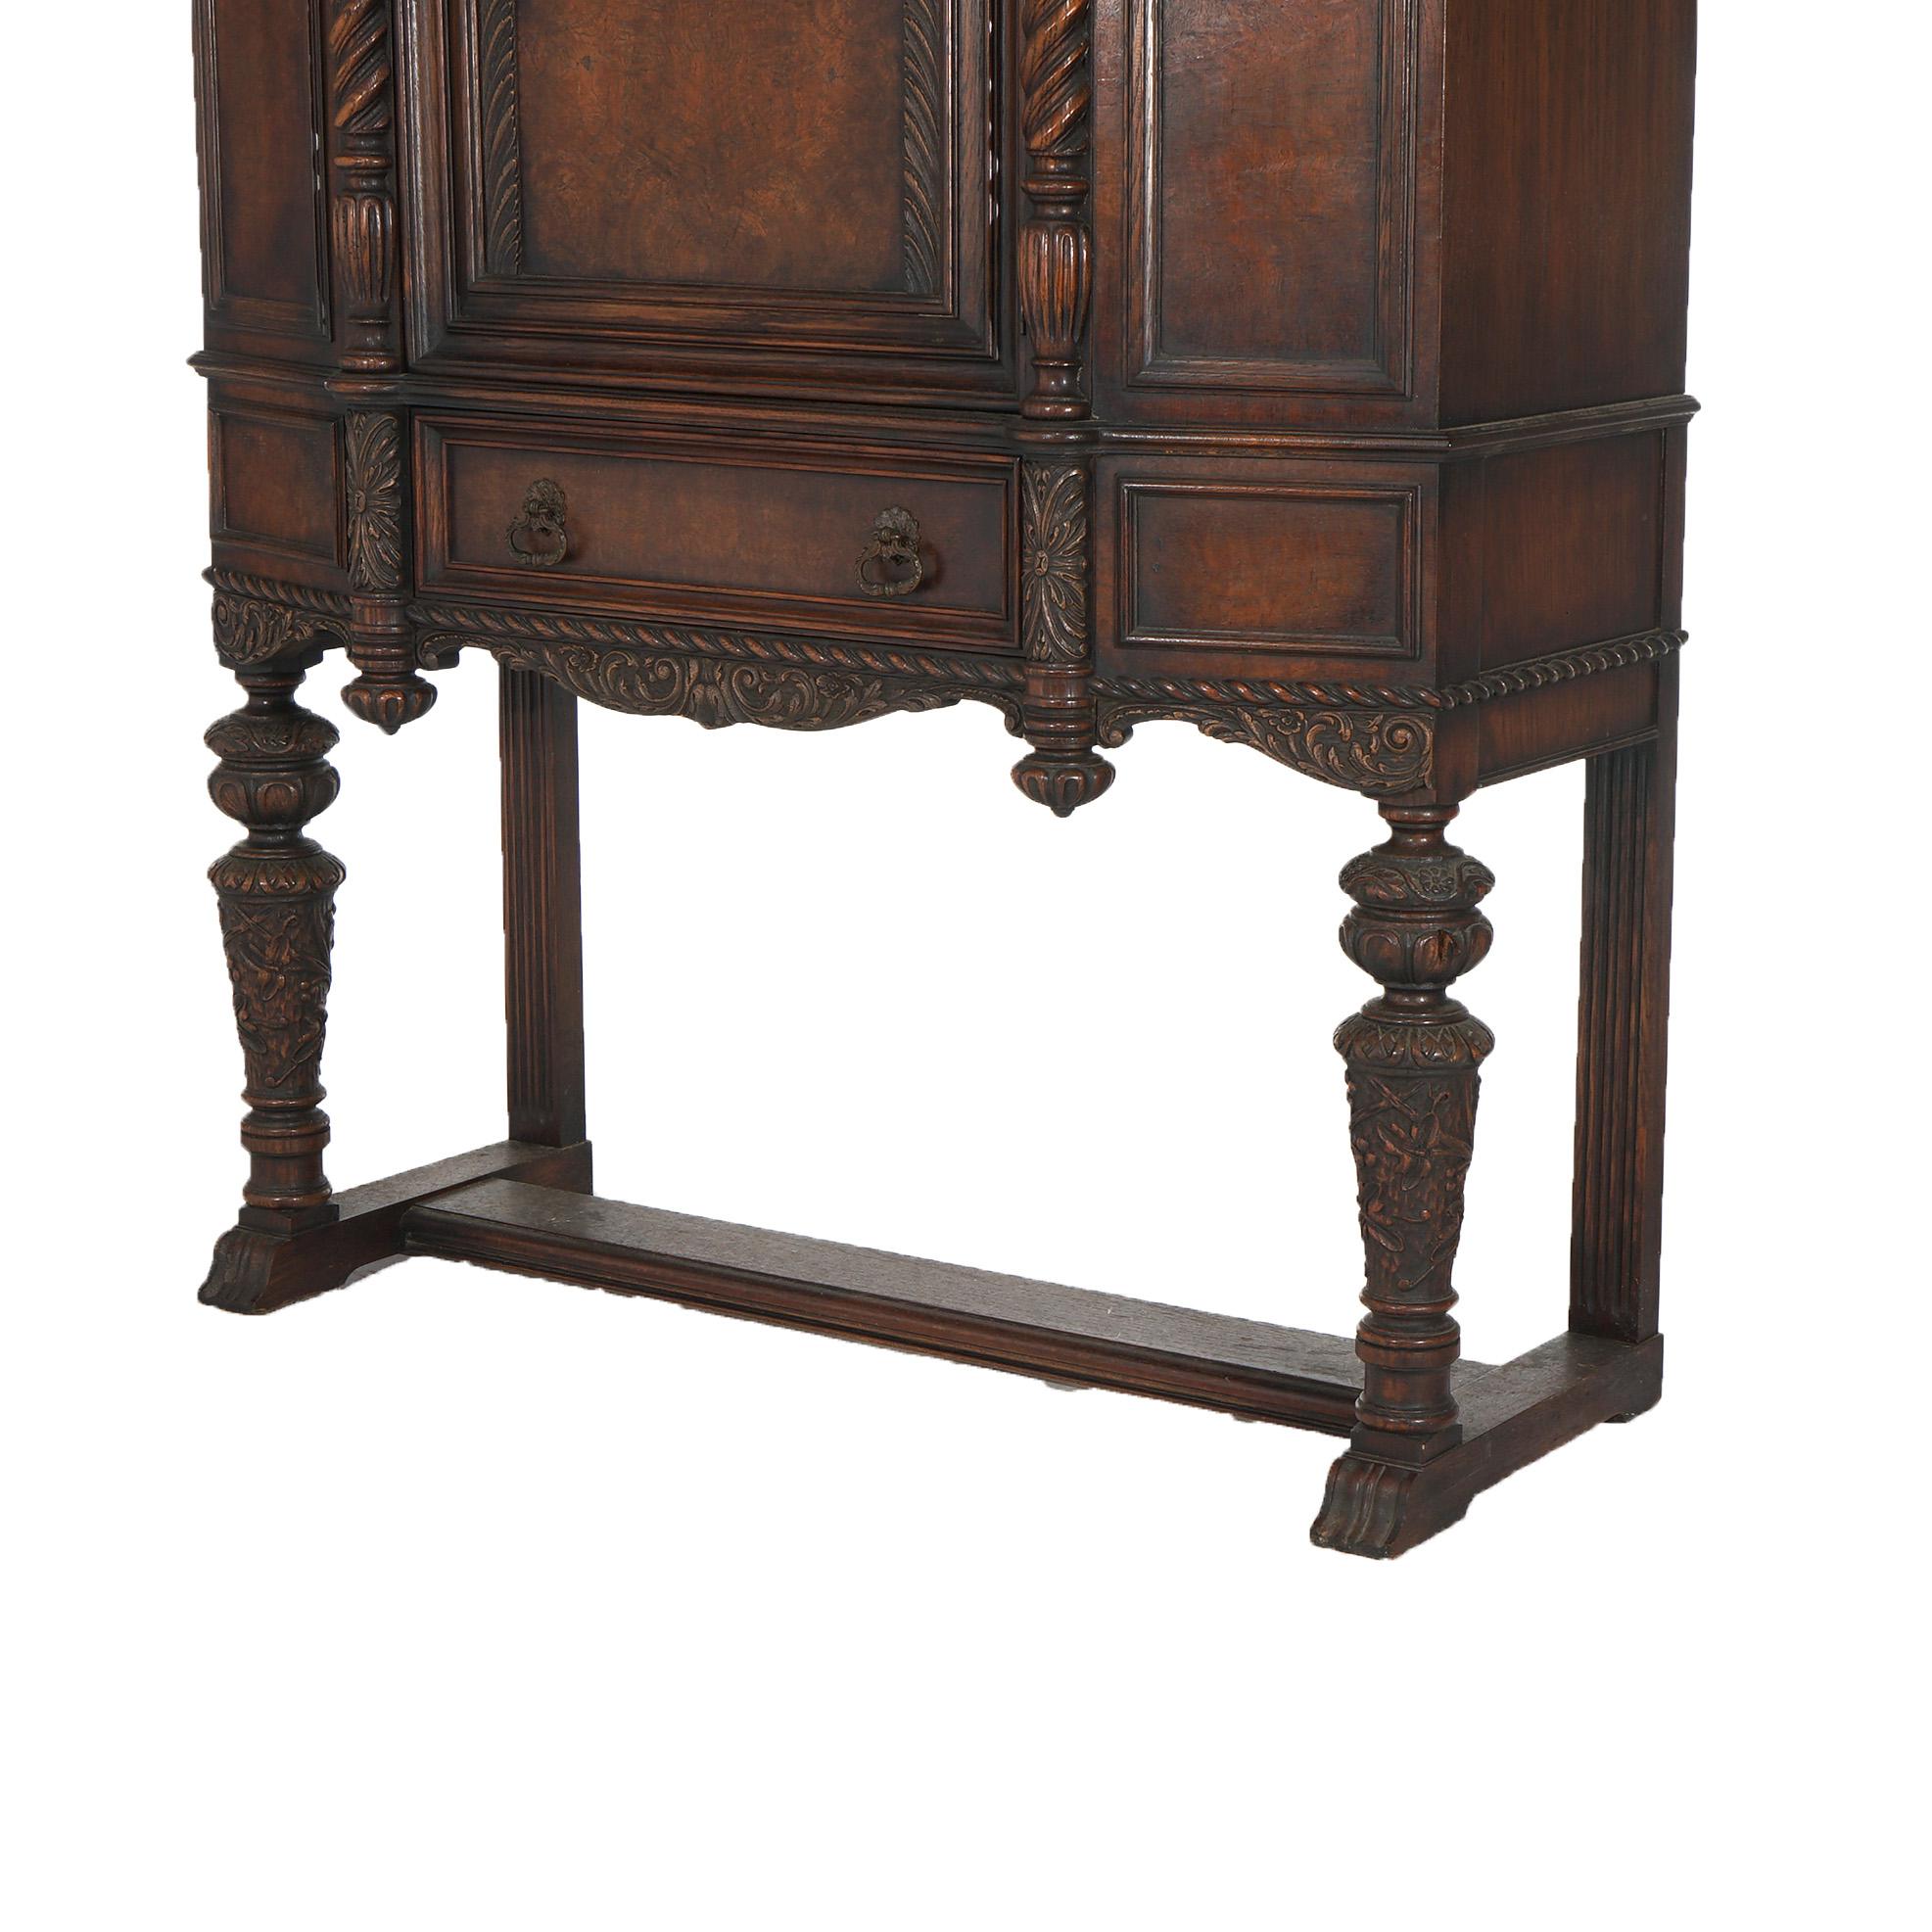 ***Ask About Reduced In-House Delivery Rates - Reliable Professional Service & Fully Insured***
An antique Elizabethan Jacobean style blind door credenza offers oak construction with broken arch crest over single door cabinet having rope twist